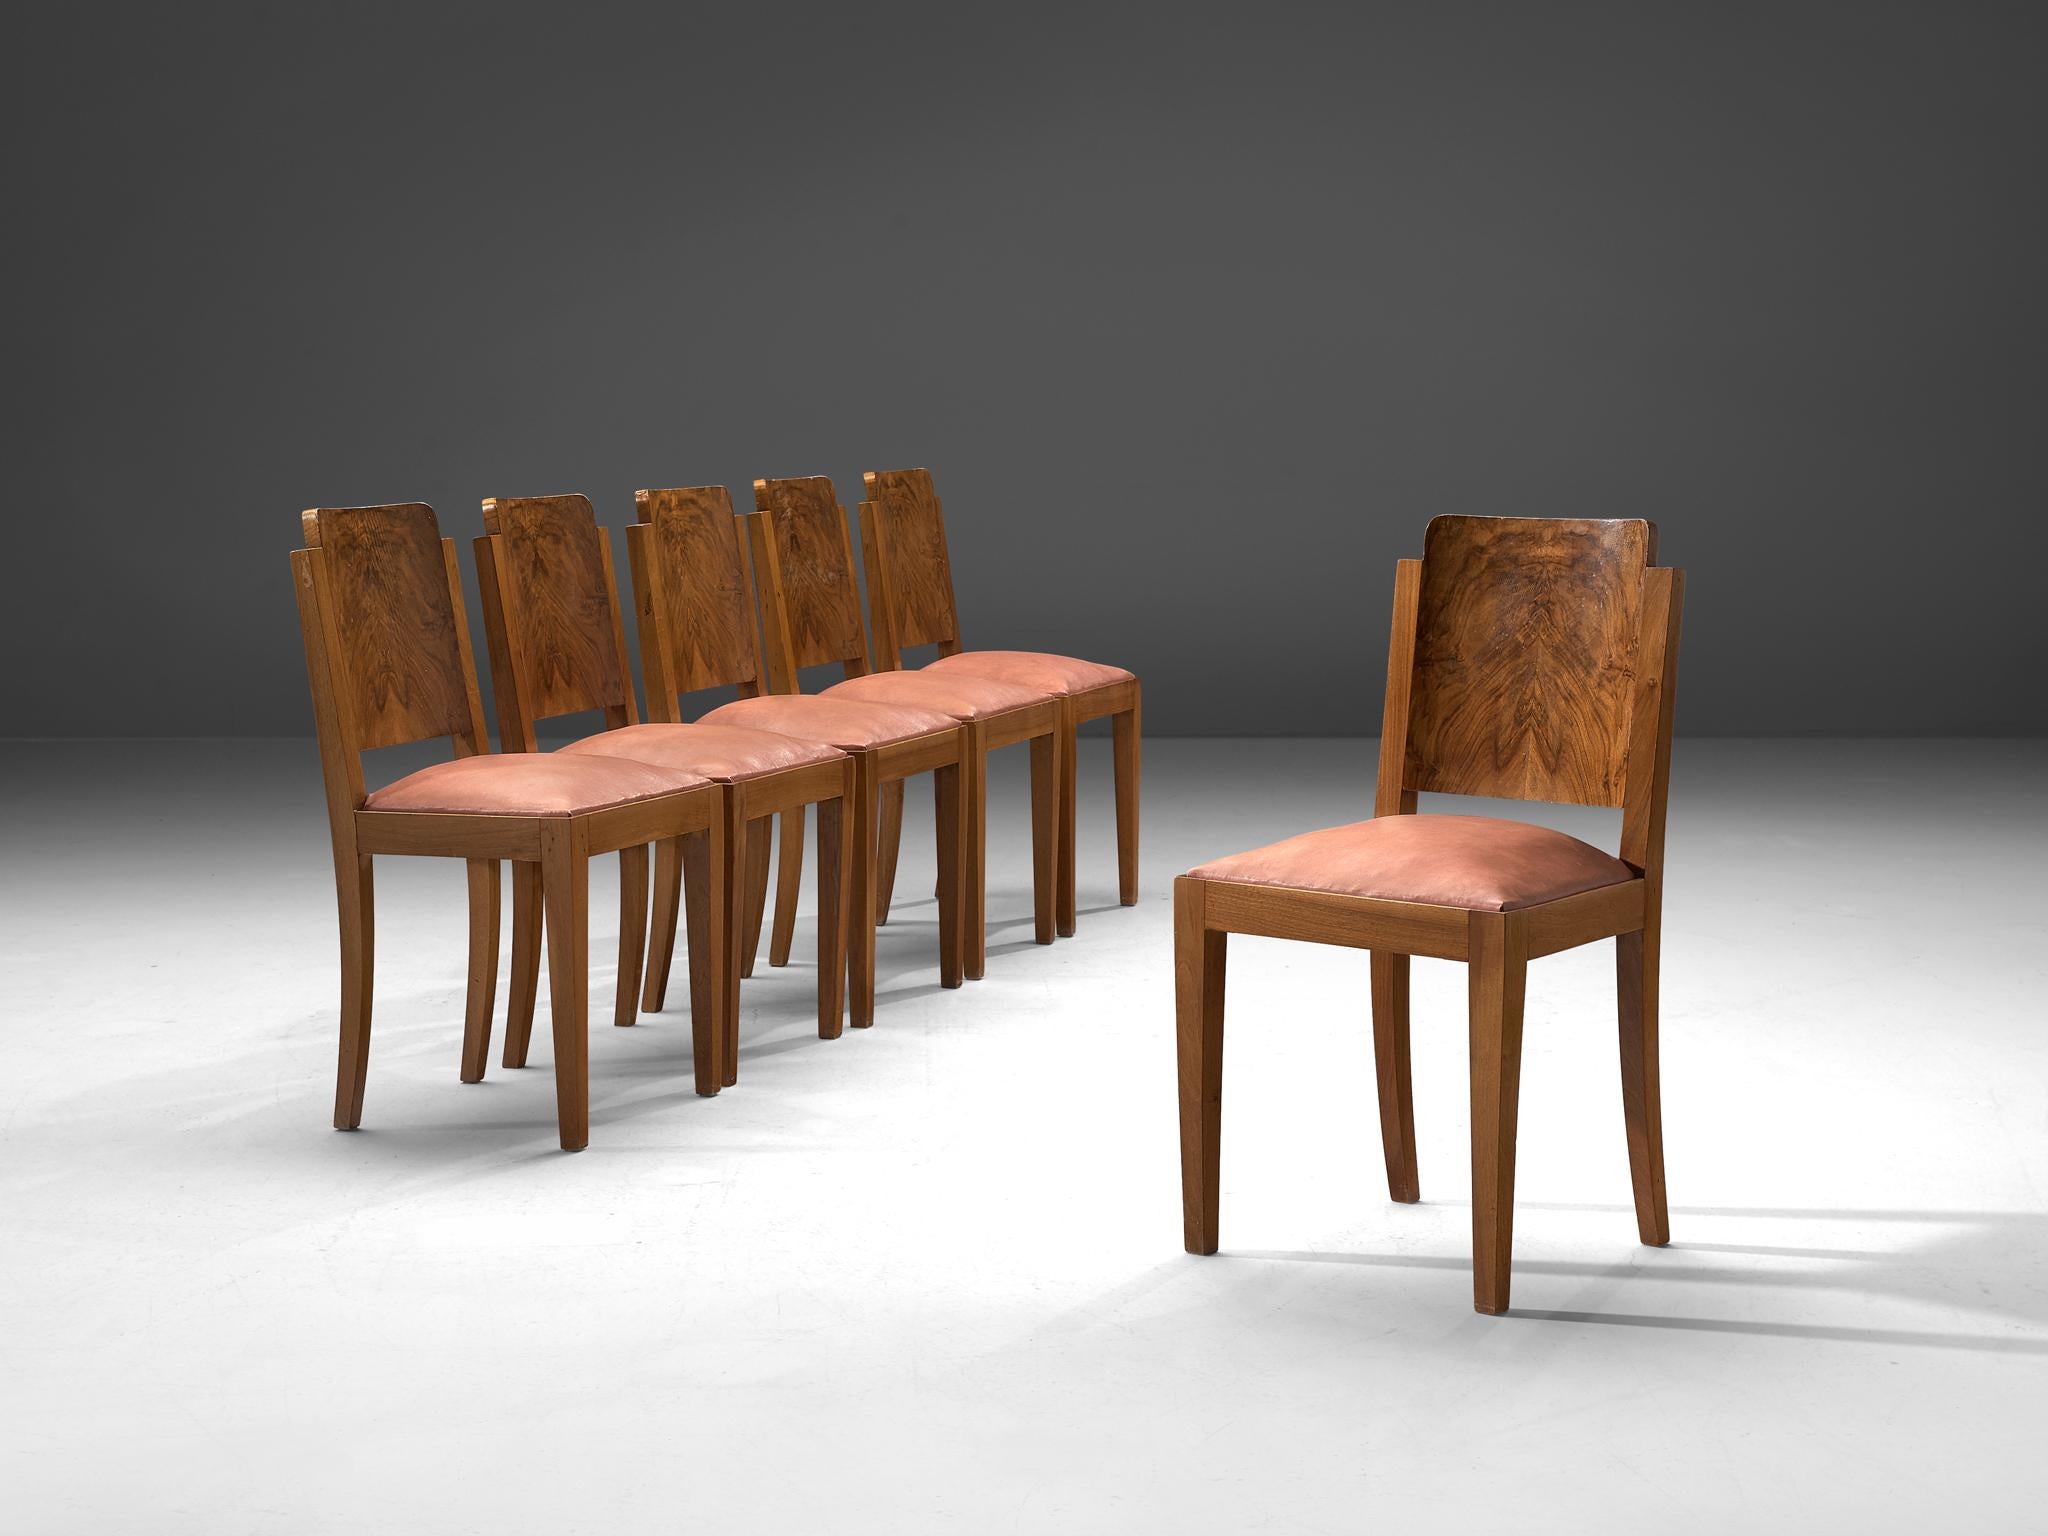 Set of 6 dining chairs, leather and walnut, Italy, 1930s

This set of six Art Deco dining chairs is upholstered in soft pink leather. The frame is made of solid walnut and features a sturdy, masculine design. The legs are rectangular and straight.